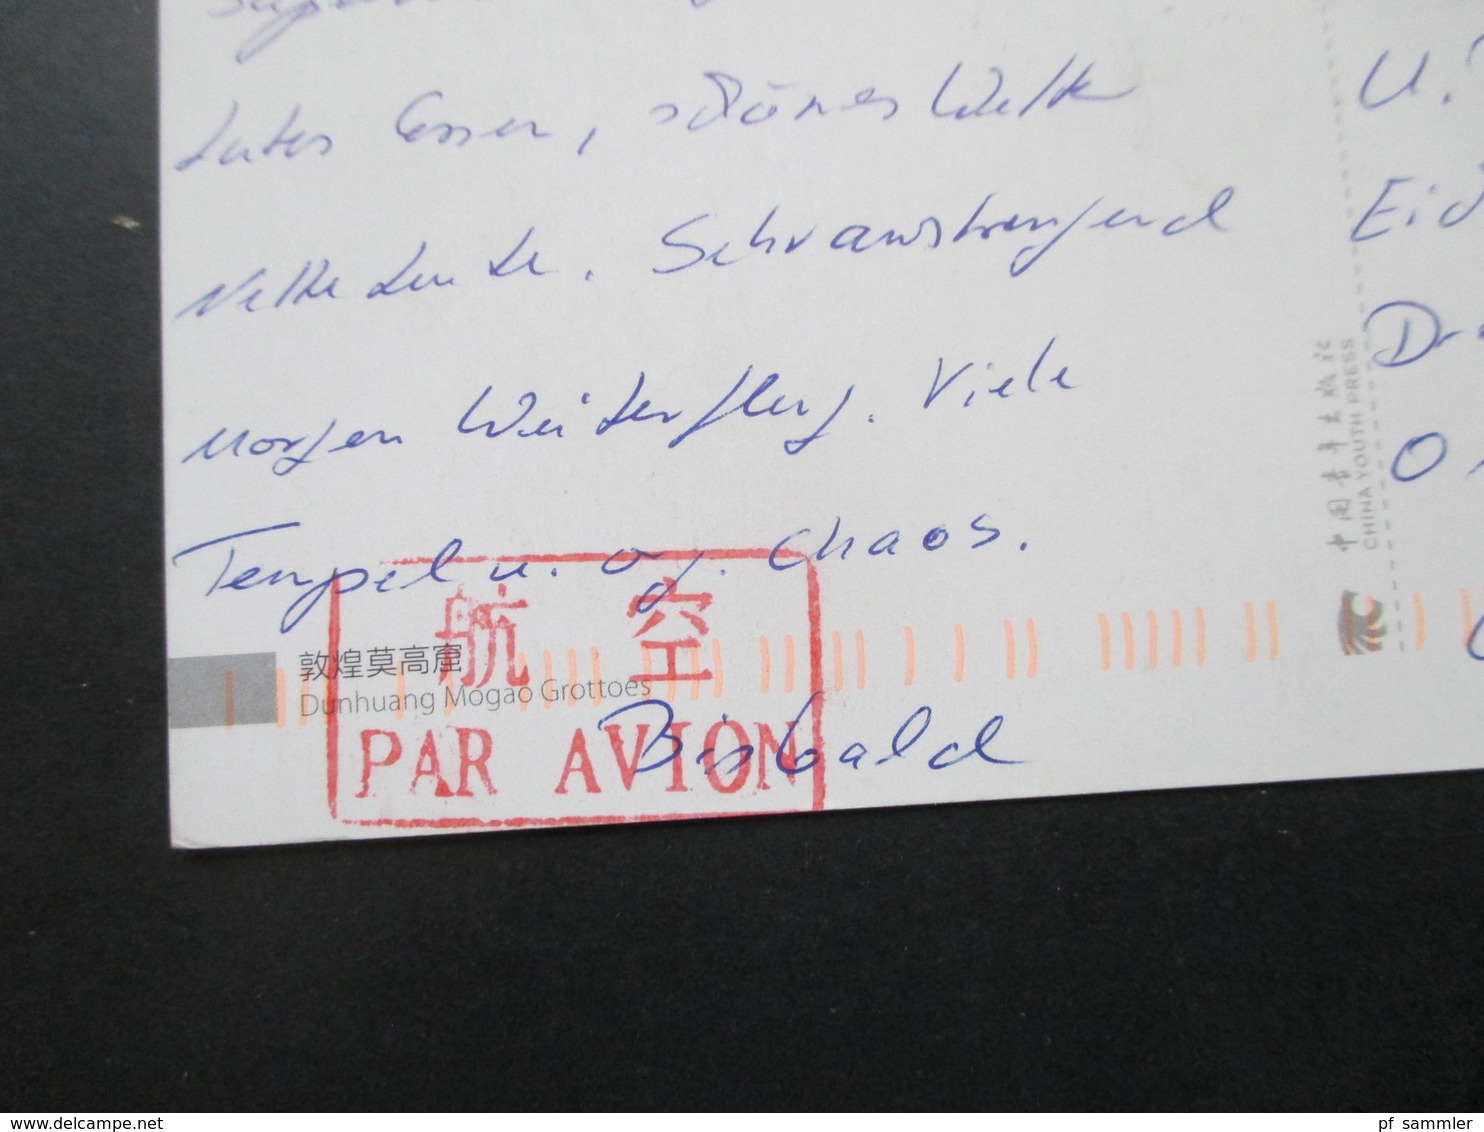 China 1998 / 2011 Postkarte / Luftpost Stempel In Rot! Dunhuang Magao Grottoes Mit 2 Marken Frankiert! - Covers & Documents